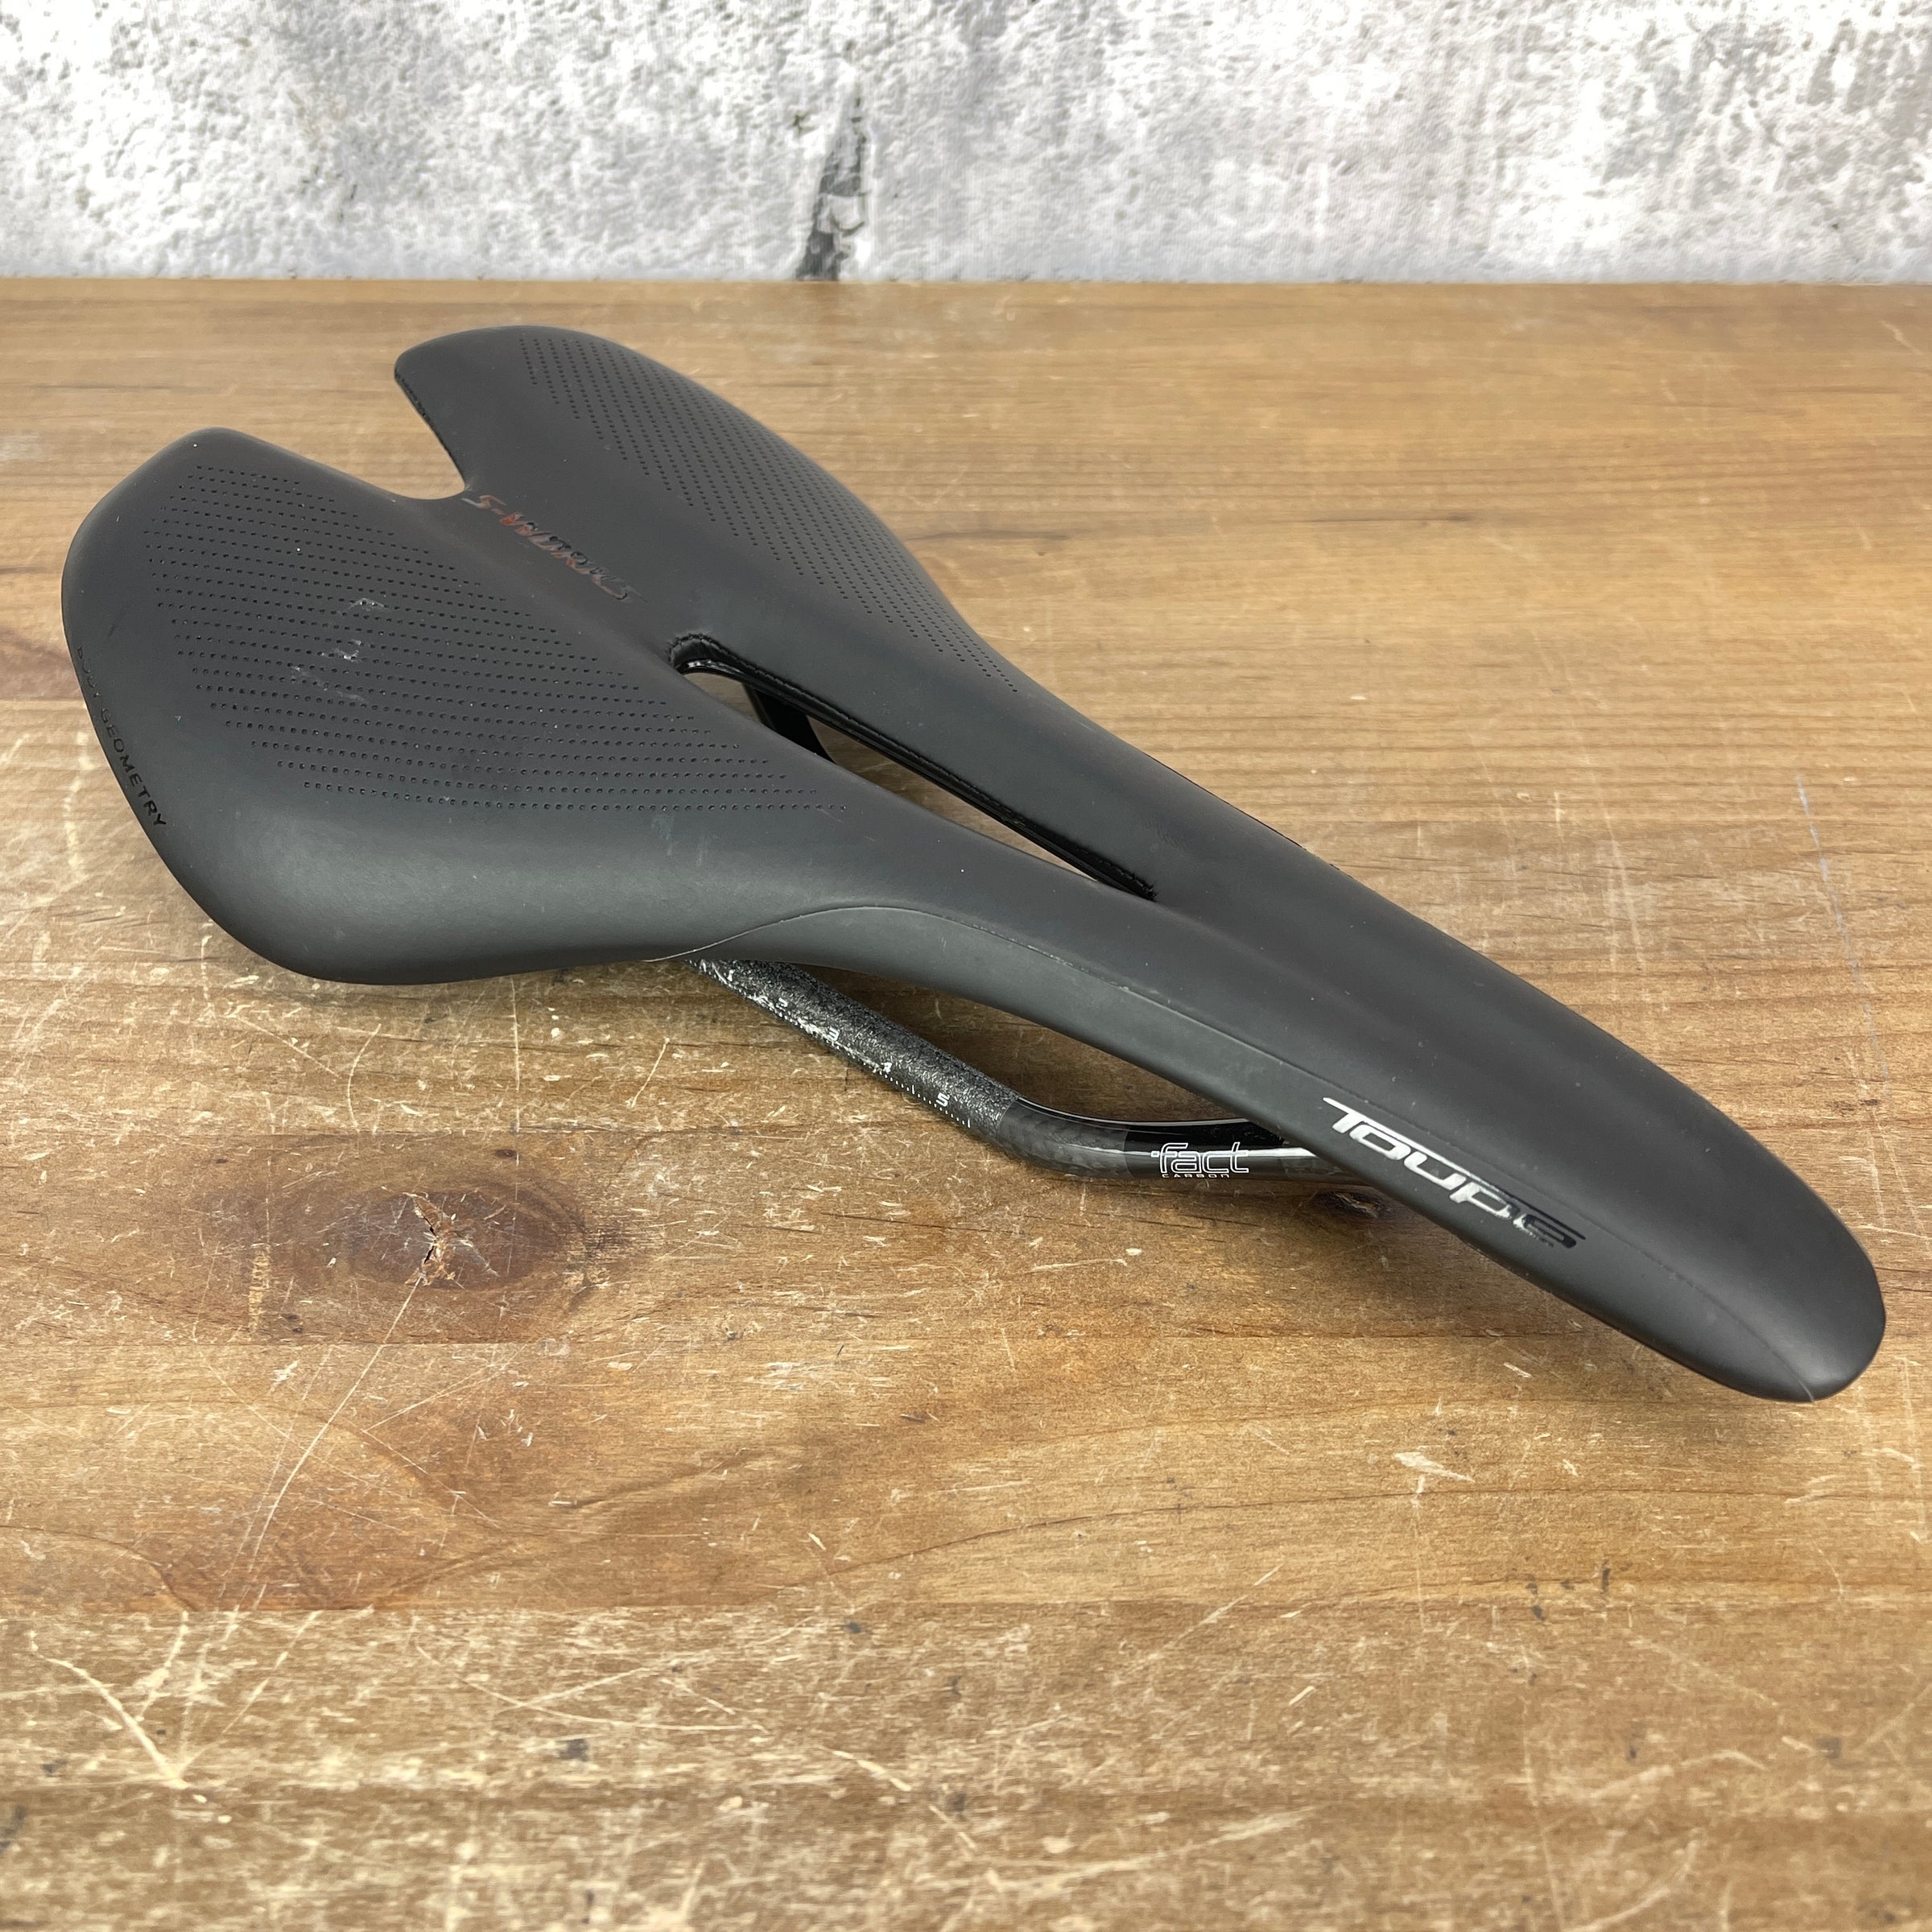 Specialized S-Works Toupe 143mm Carbon Rail Road Bike Saddle 150g 